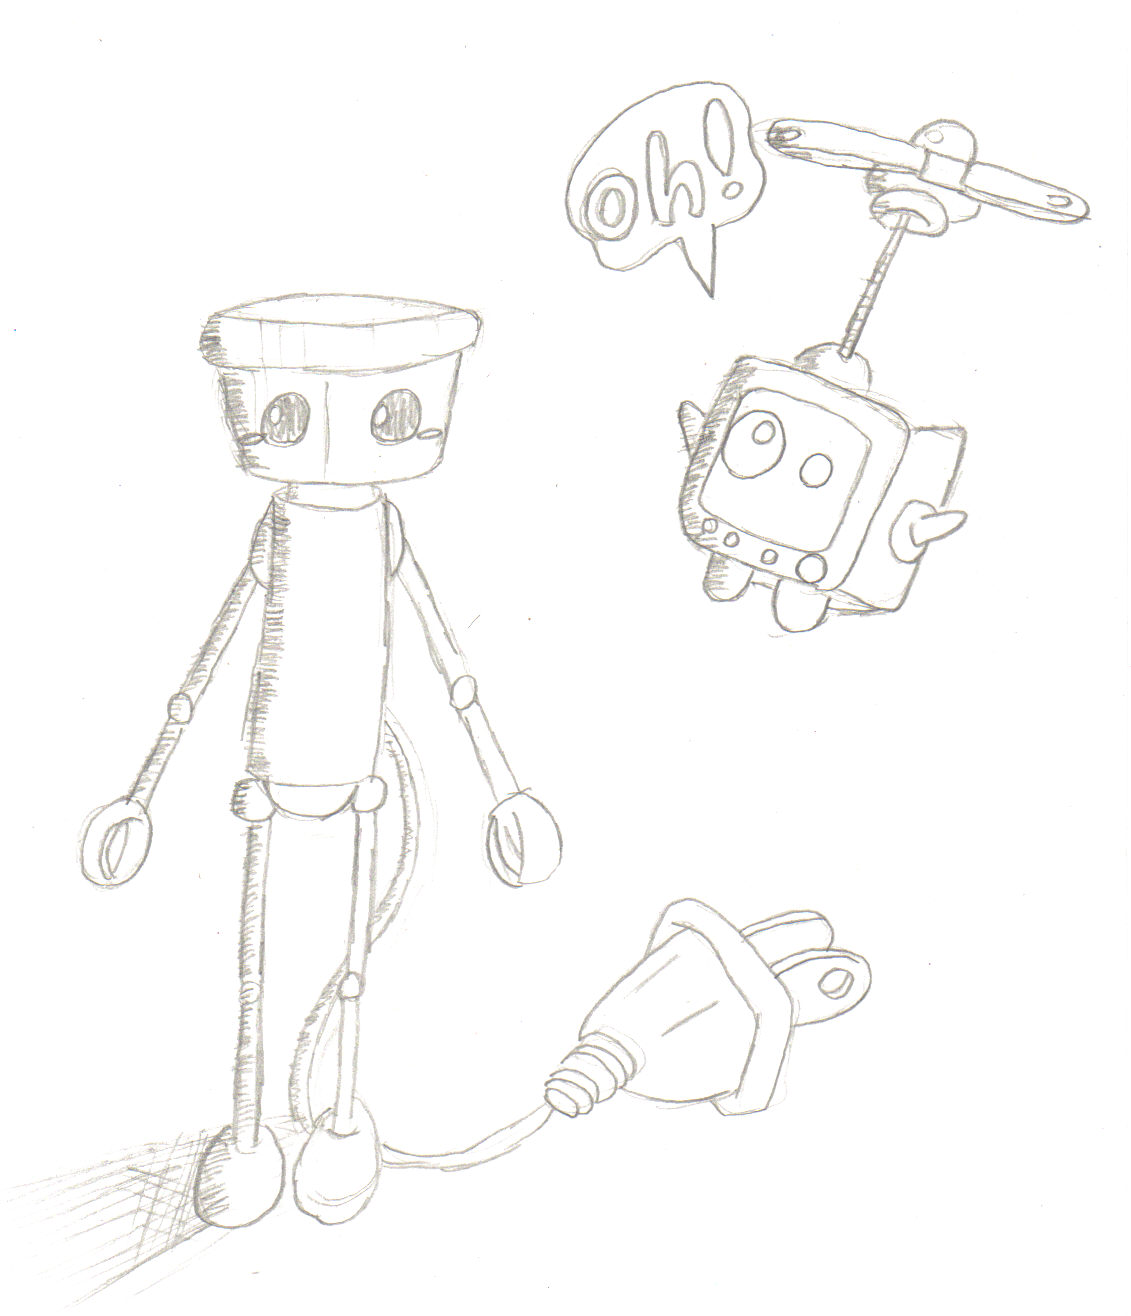 Chibi robo and telly by Gamer_girl